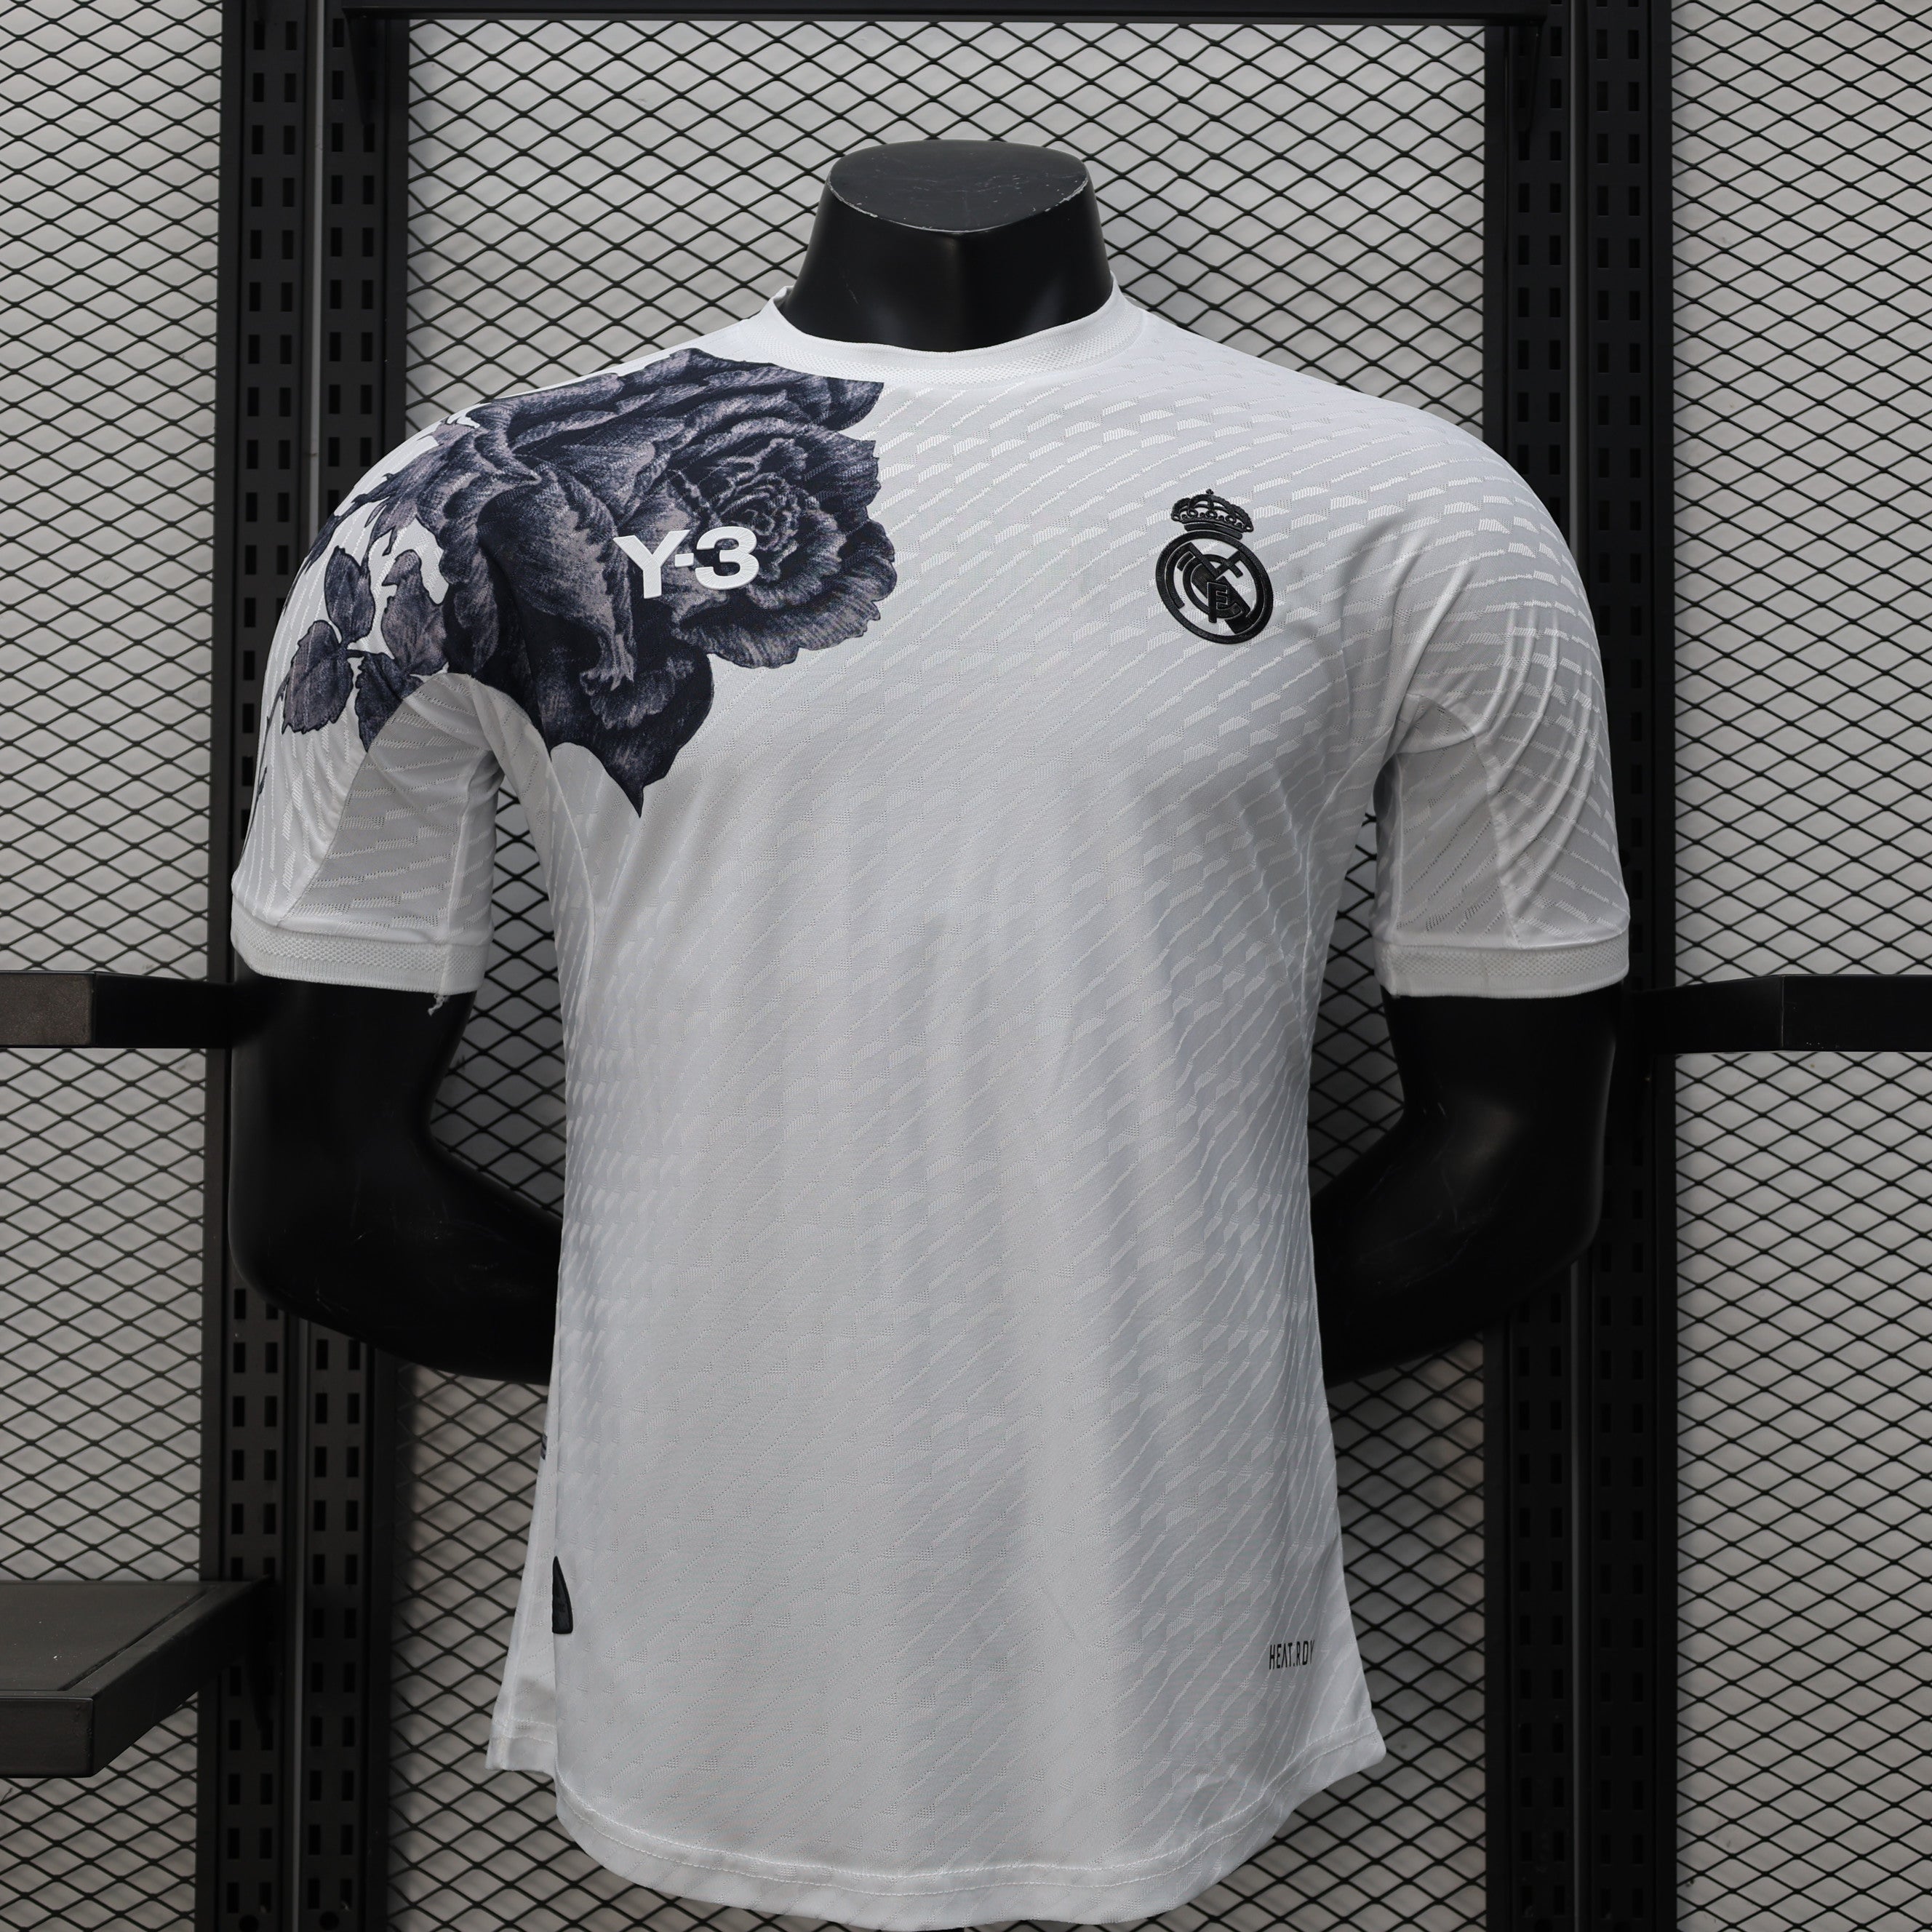 REAL MADRID Y3  white player version jersey